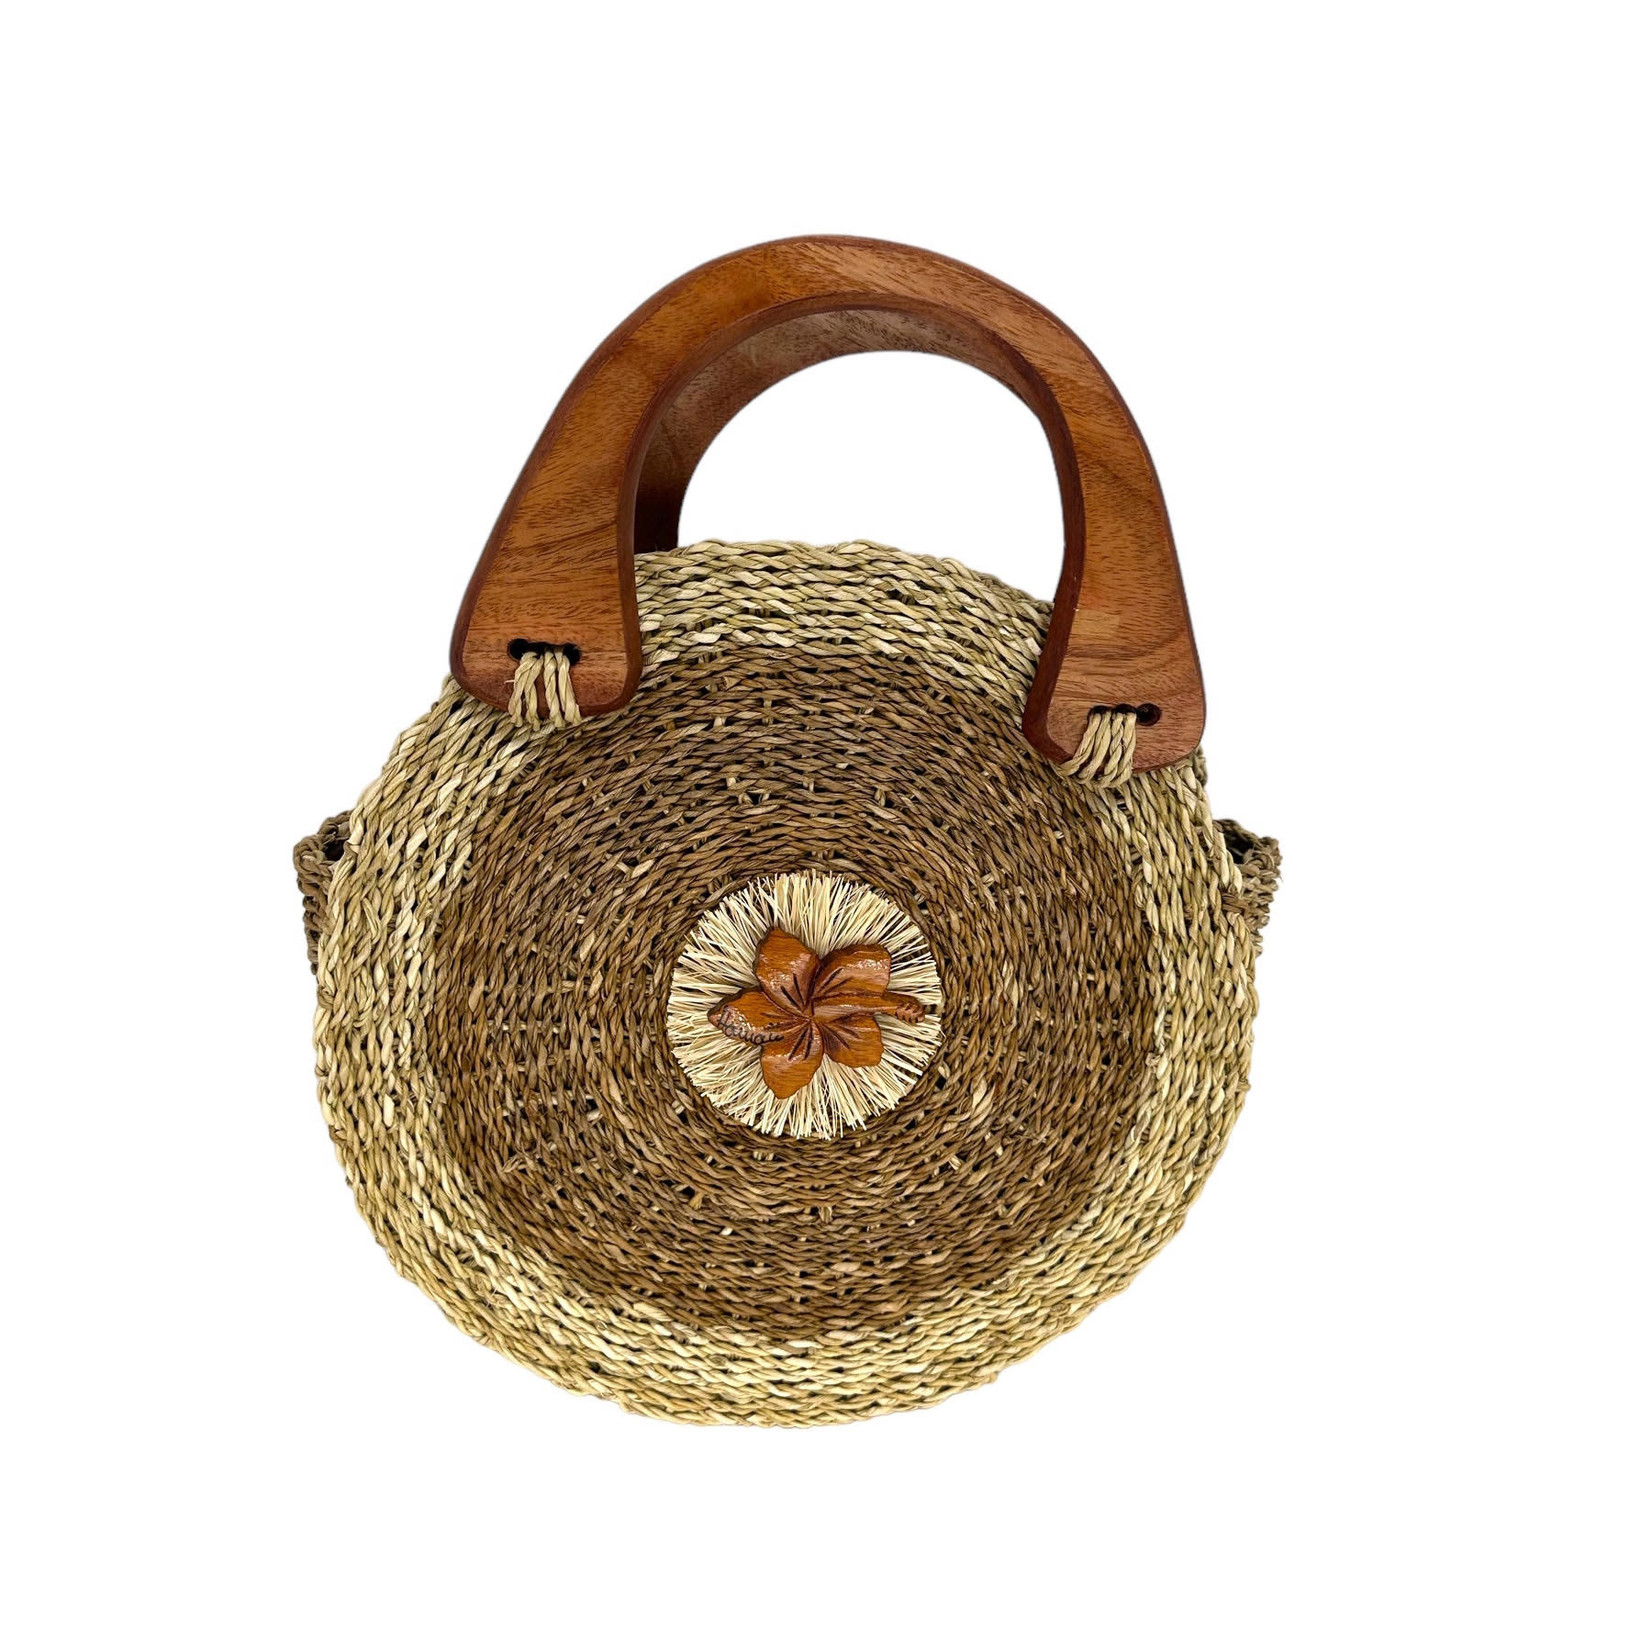 Woven Lauhala Bag with Wood Handles Pia